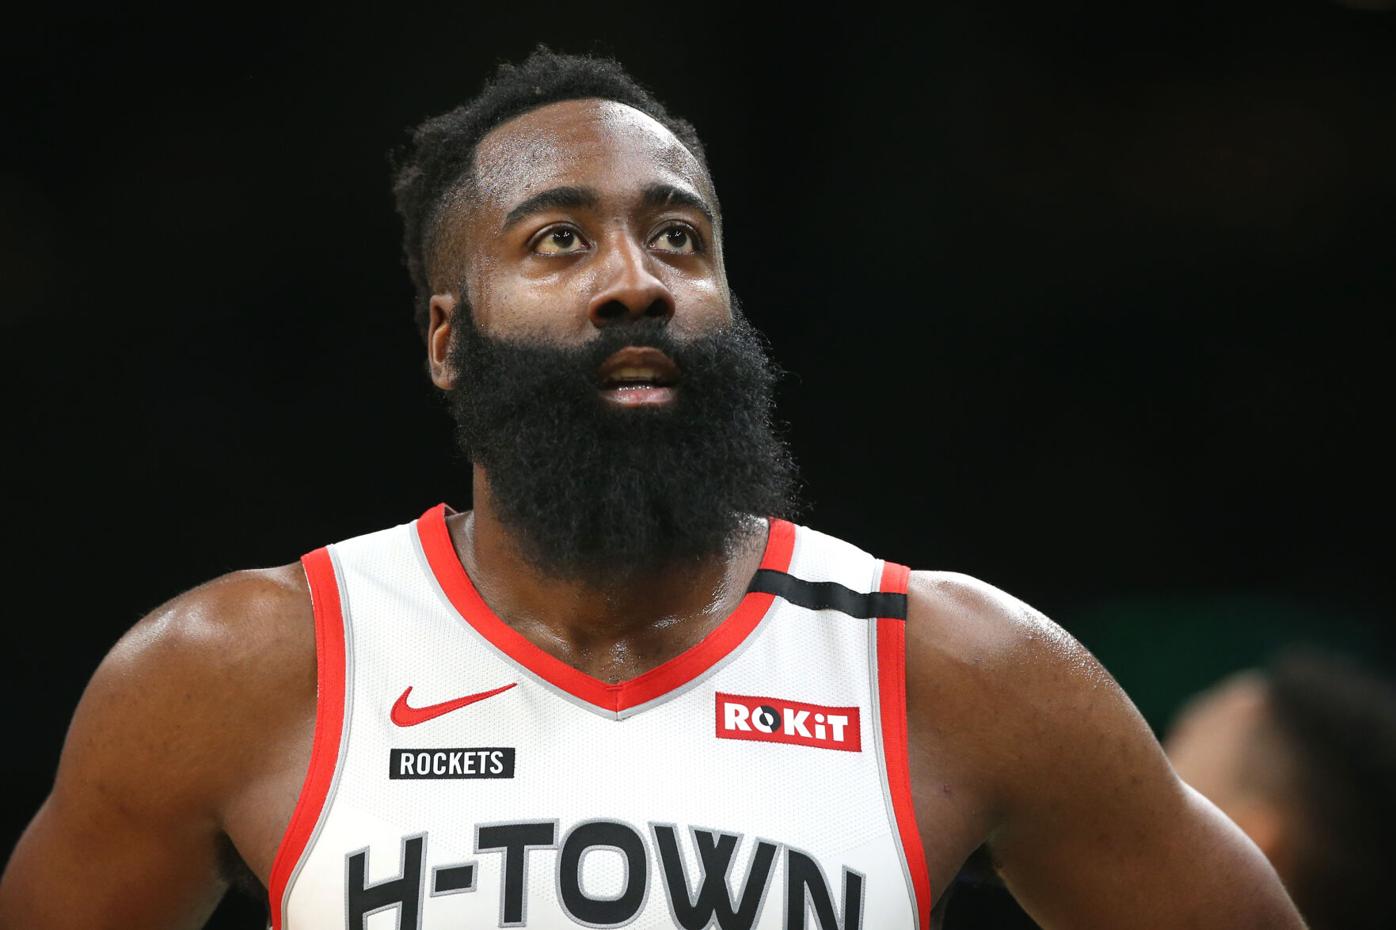 James Harden's blue furry get-up was designed in Milan, not on